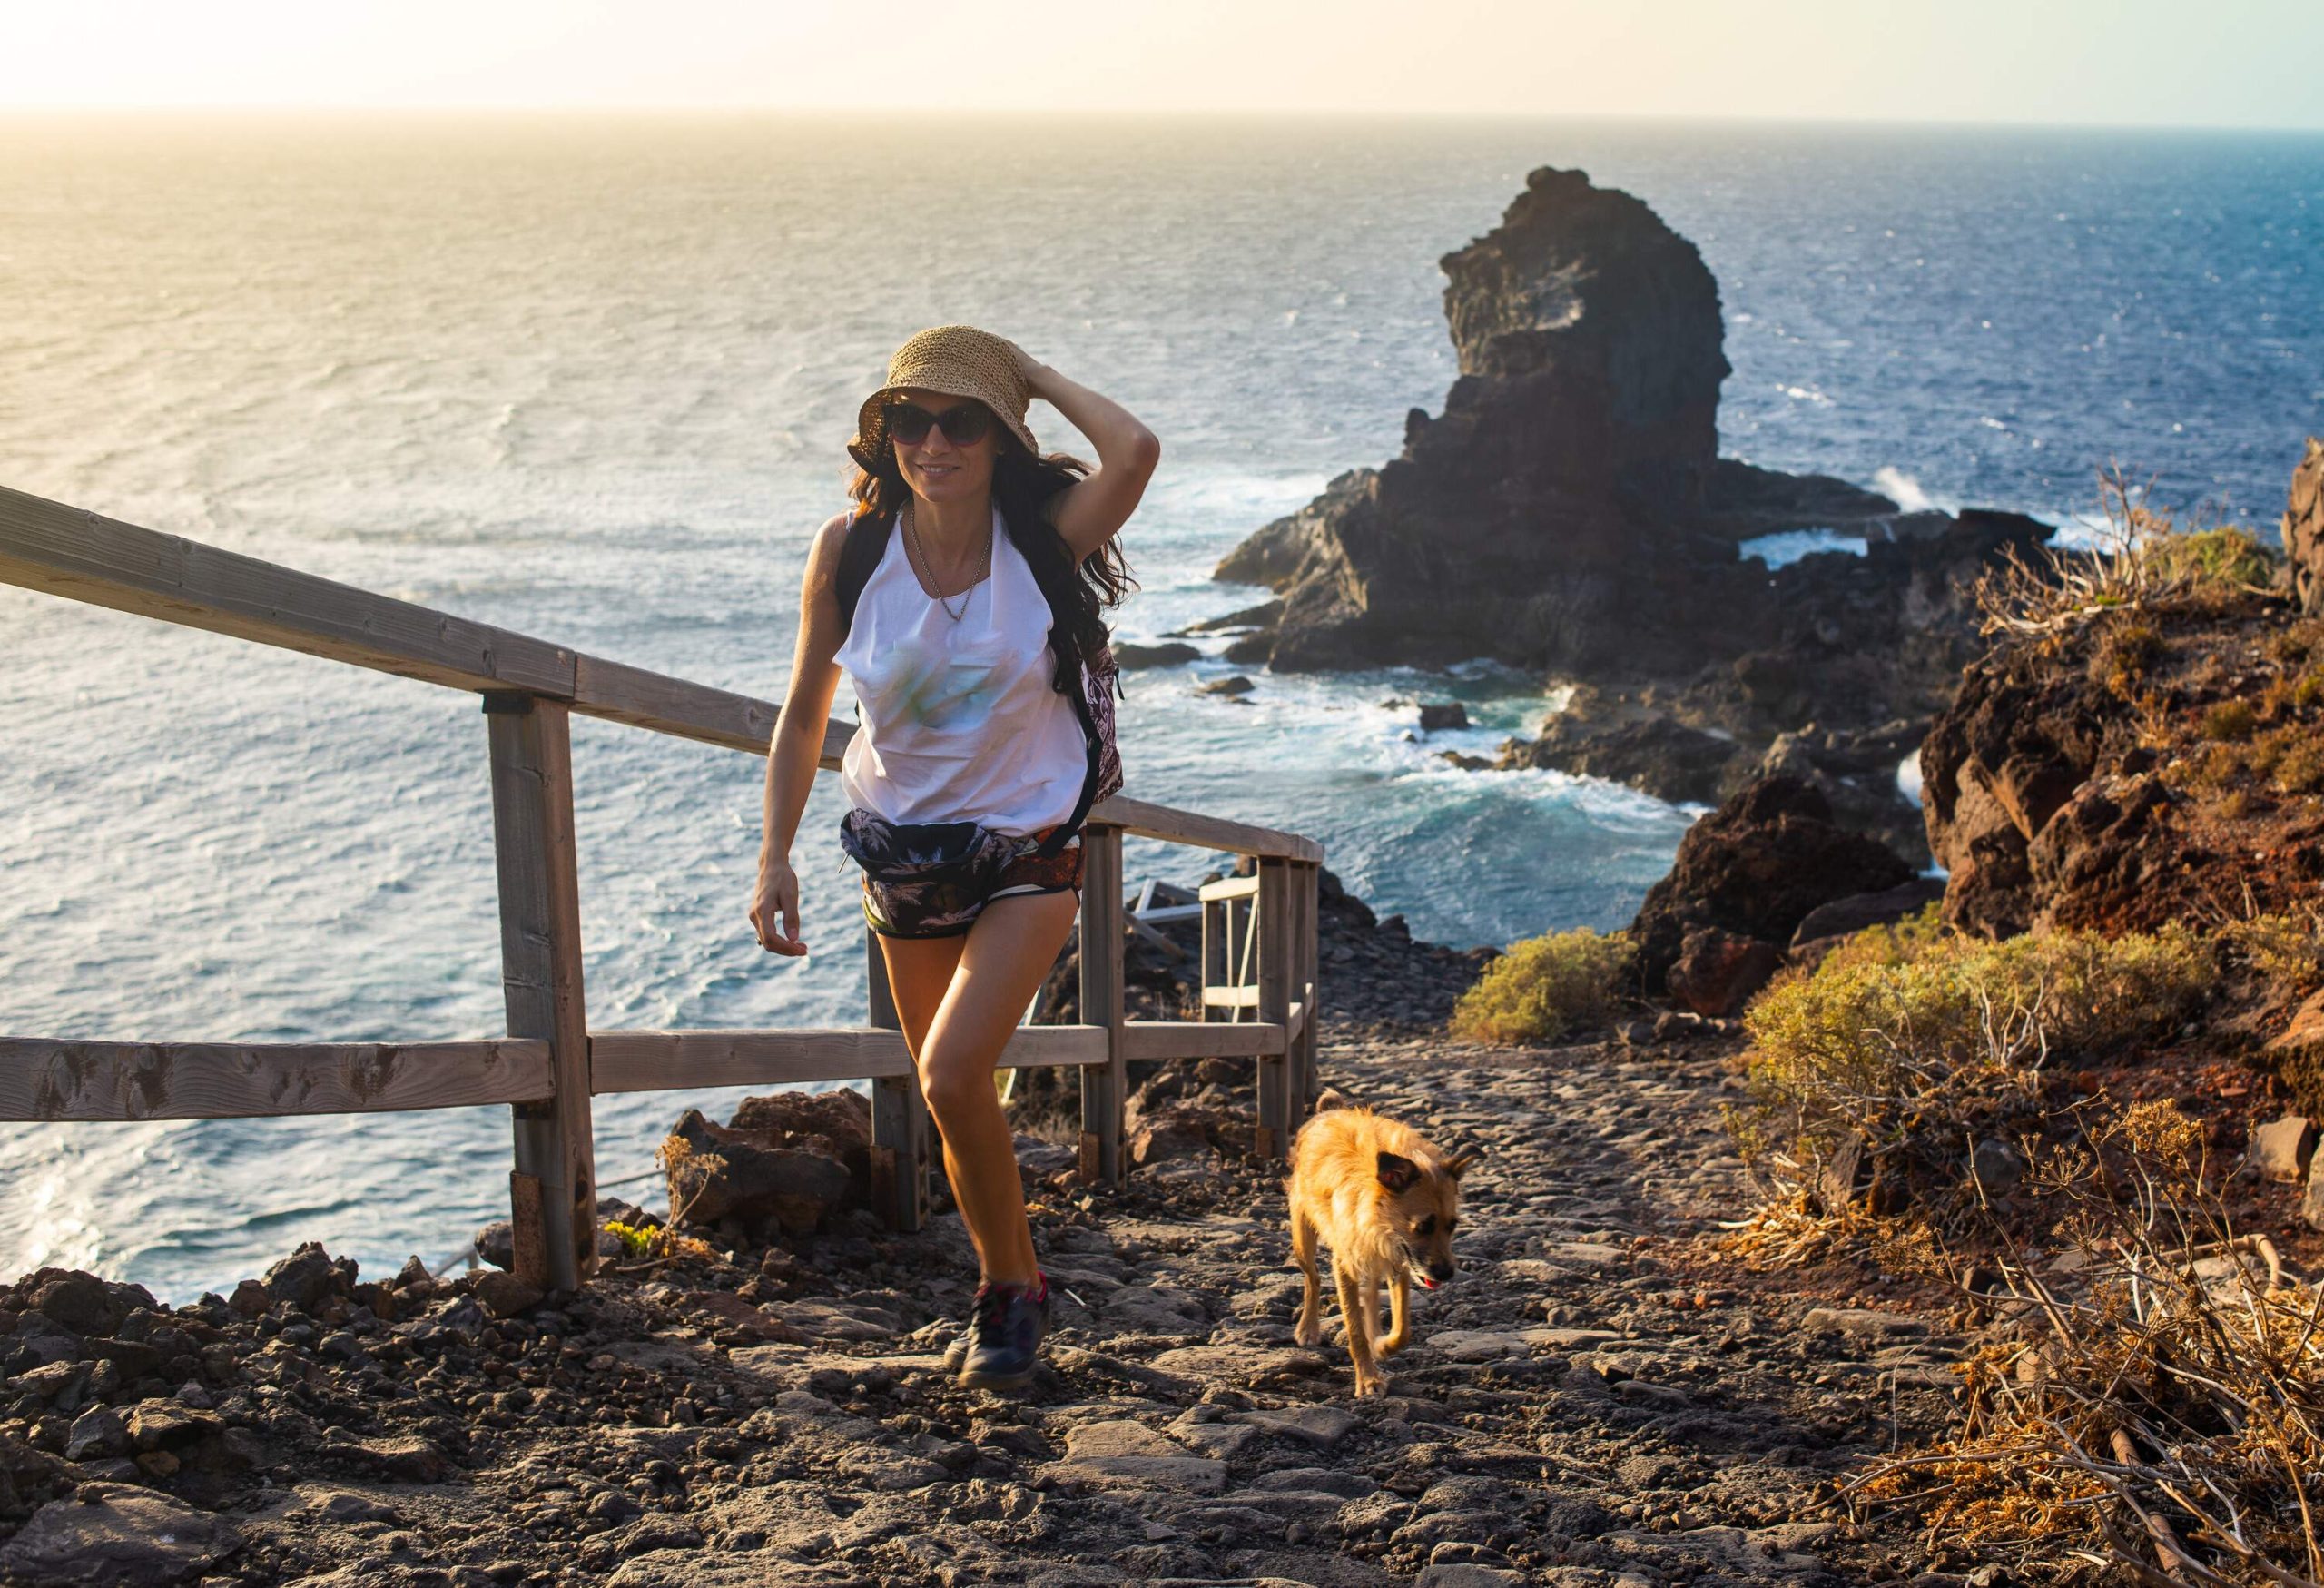 A person with a brown dog walks uphill on a canary volcanic island by the sea.